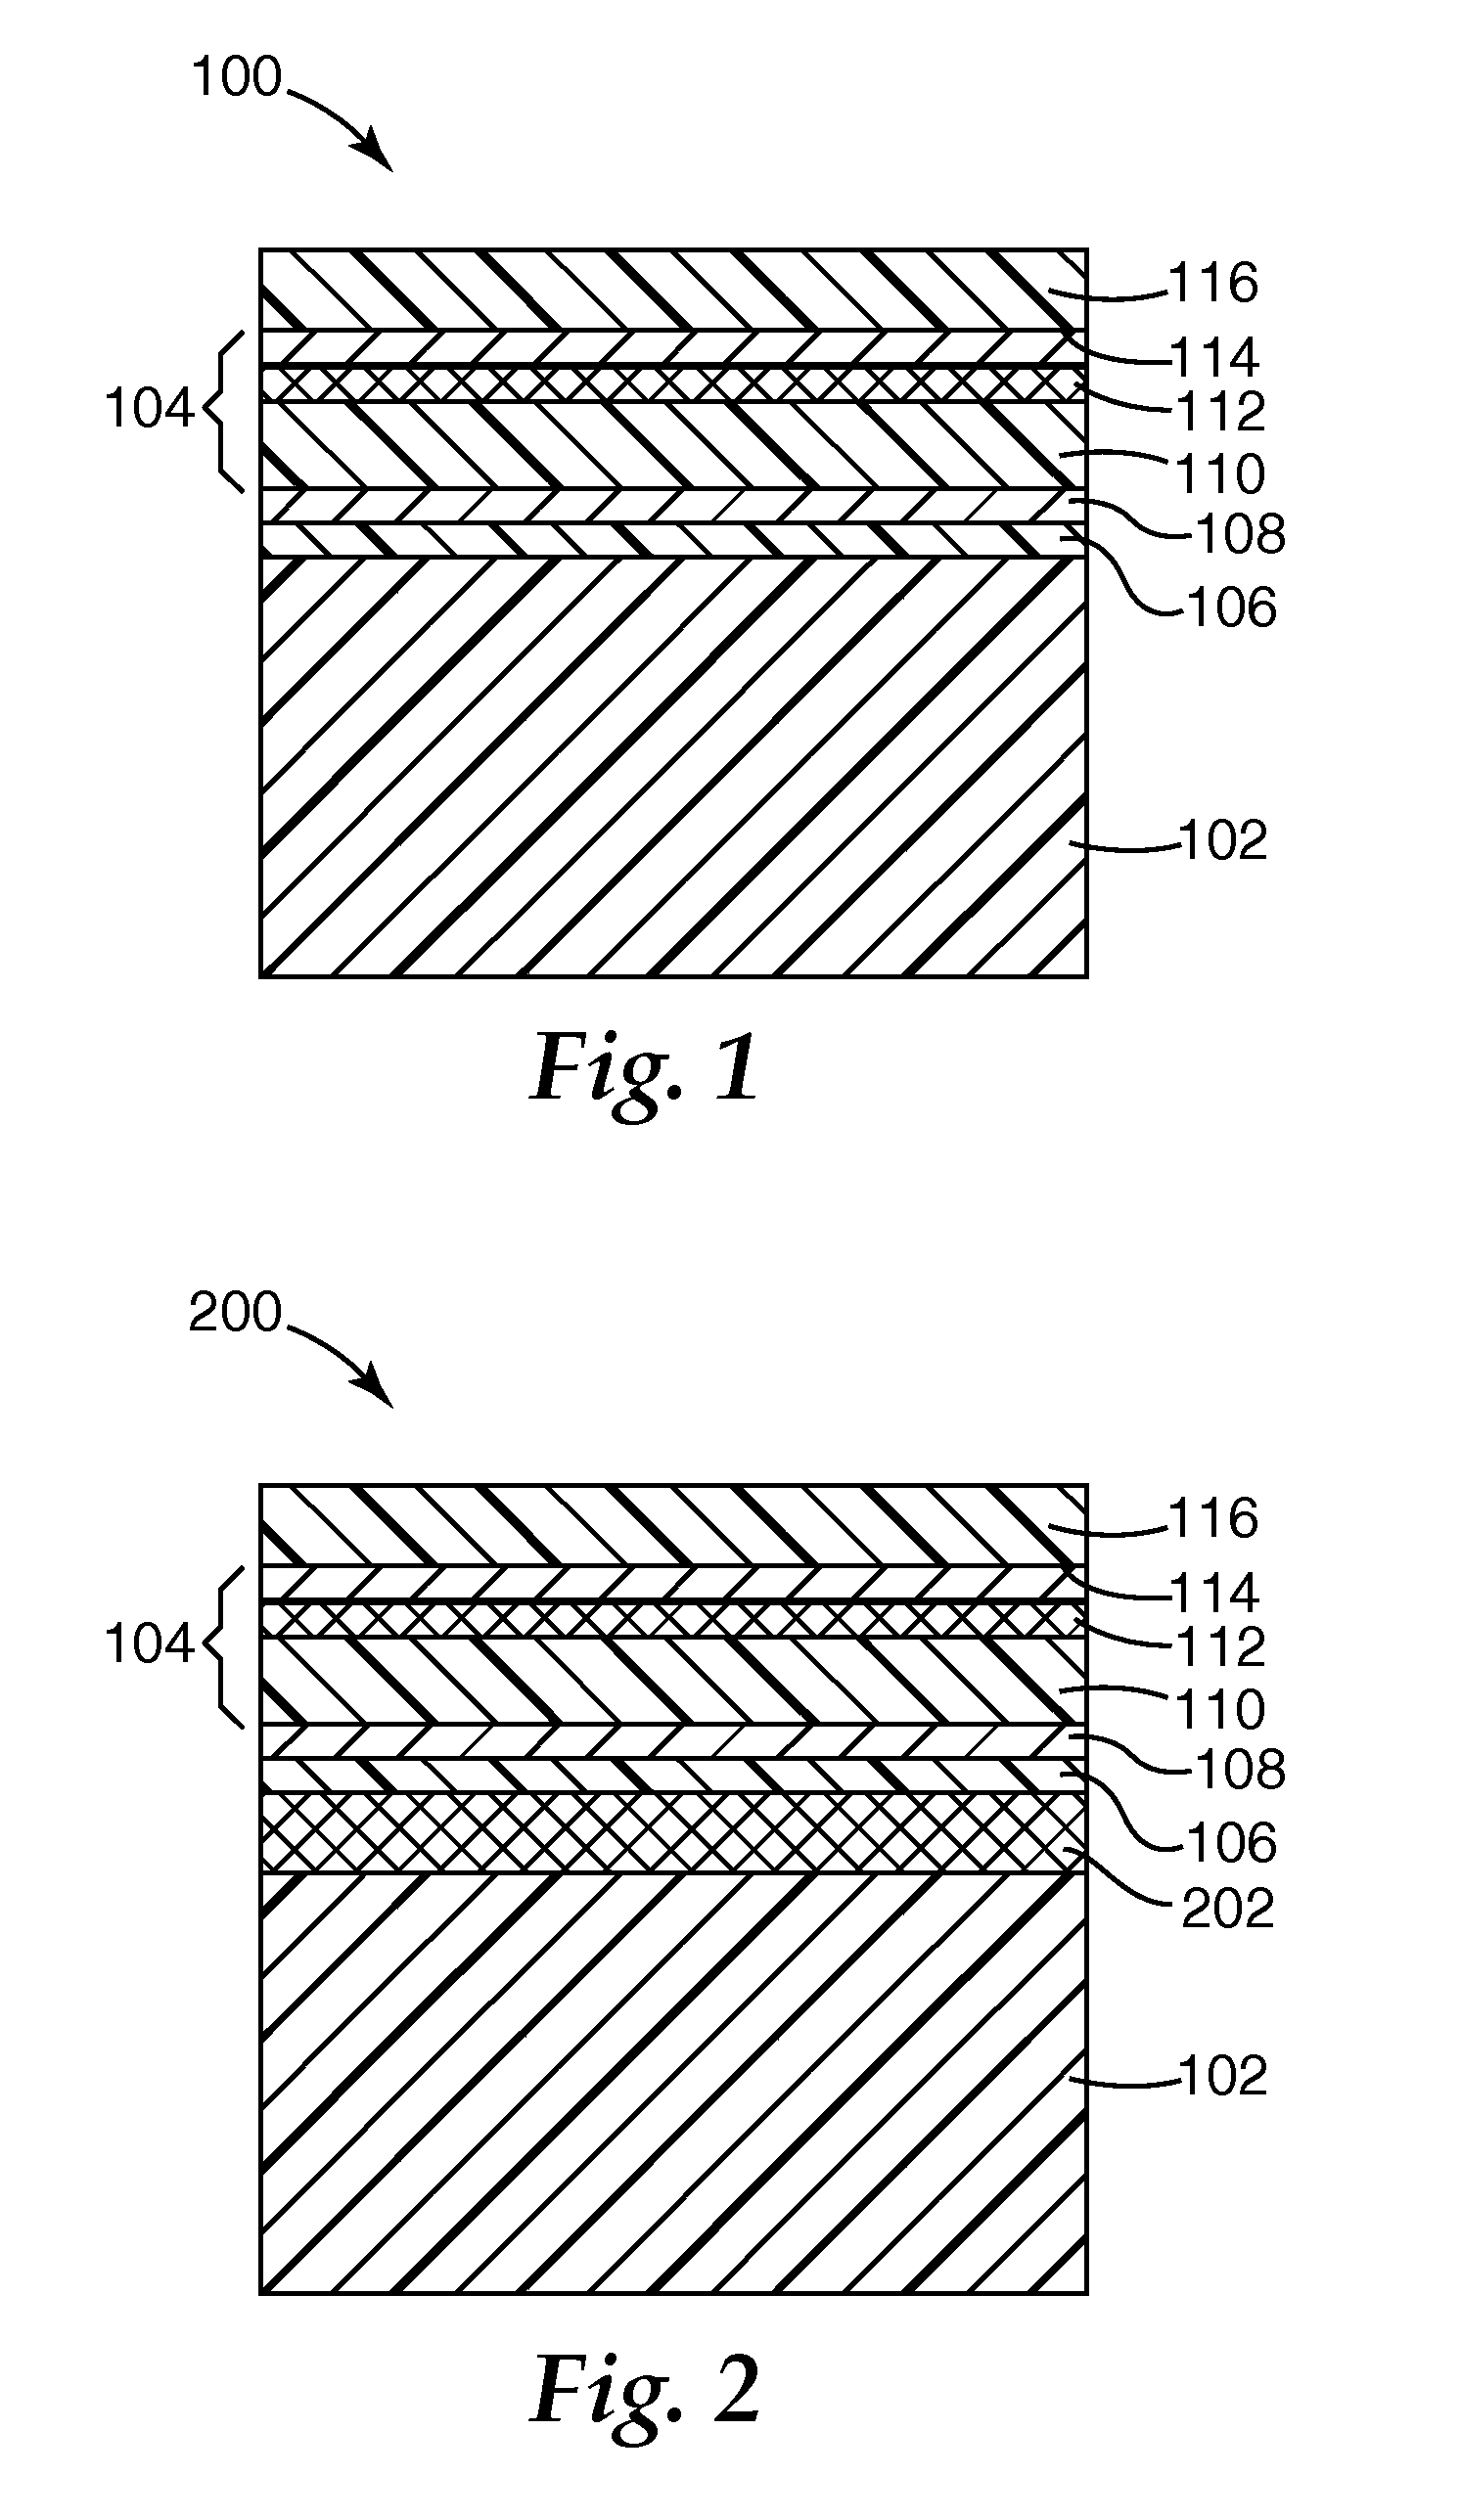 Infrared reflecting films for solar control and other uses